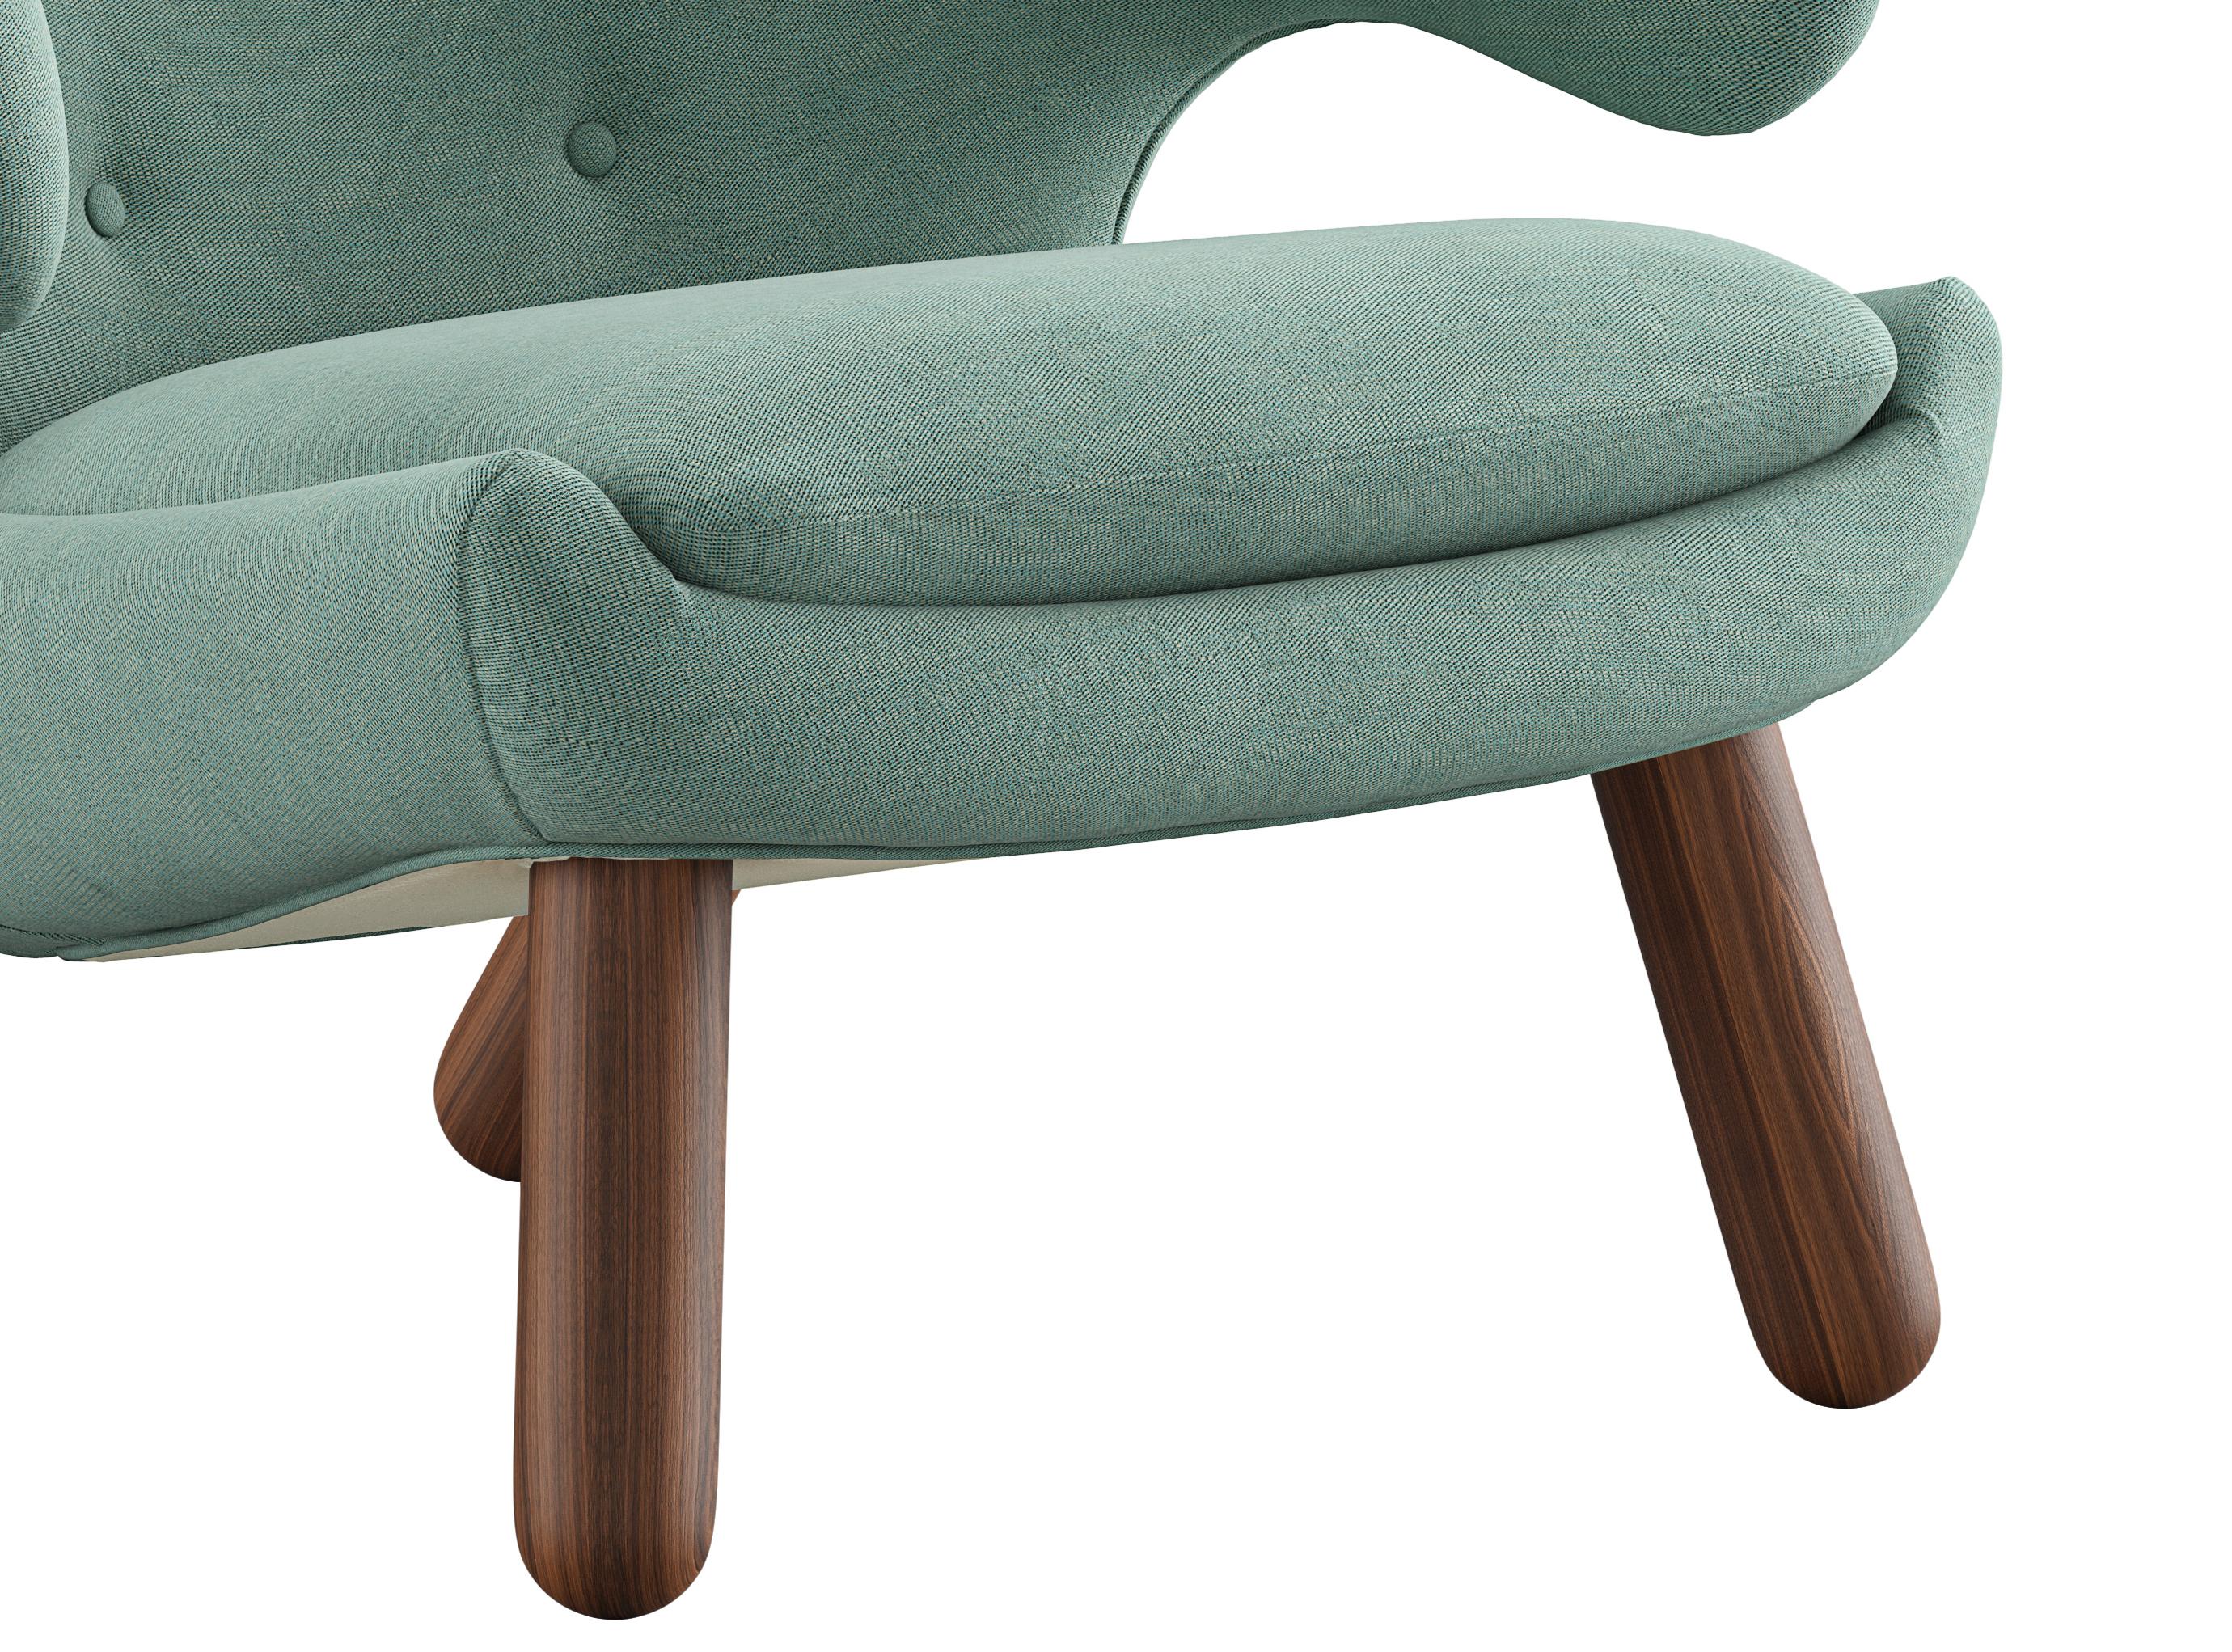 Contemporary Set of Two Finn Juhl Pelican Chair Upholstered in Wood and Fabric